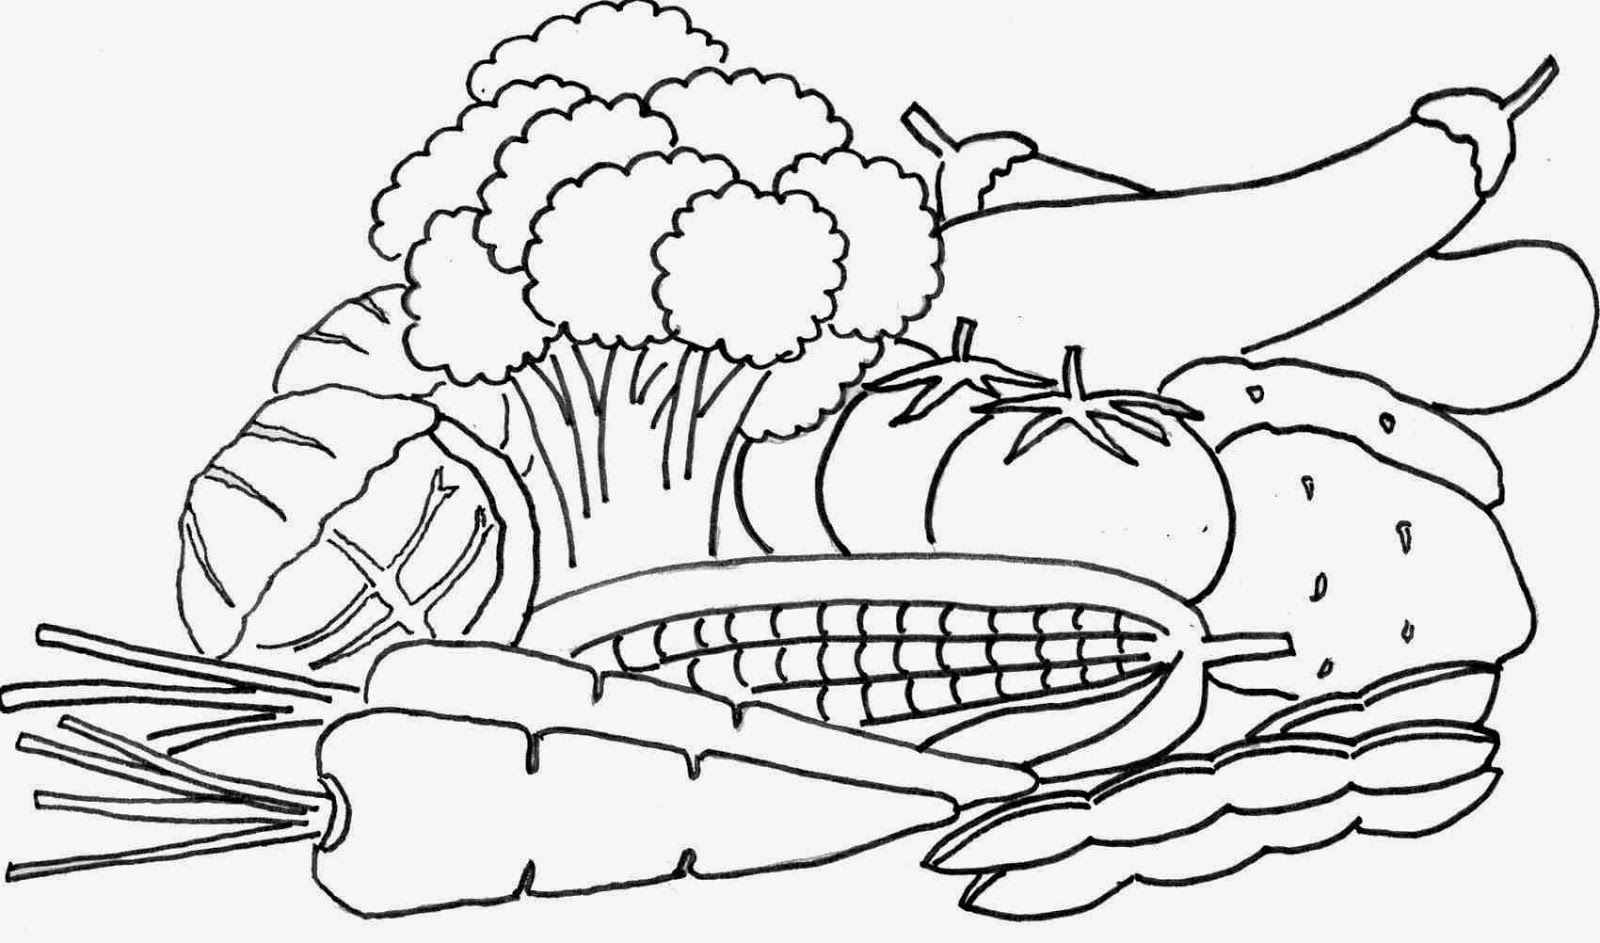 Harvest Fruits And Vegetable Coloring Pages Coloring Pages